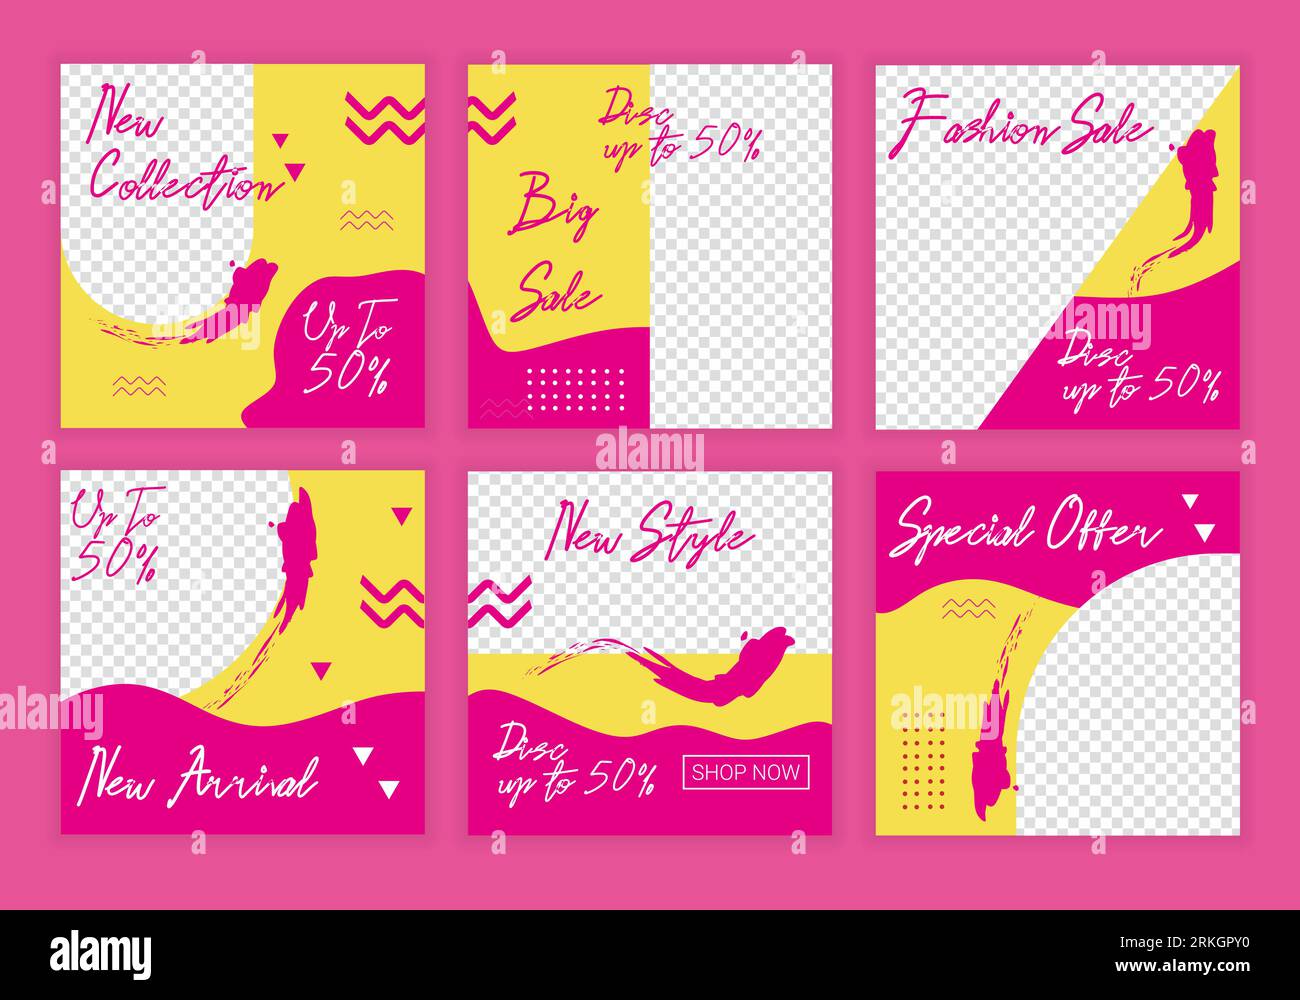 Set of creative square sale banner template with pink and yellow color combination for social media post or promotion, special offer and new arrival d Stock Vector